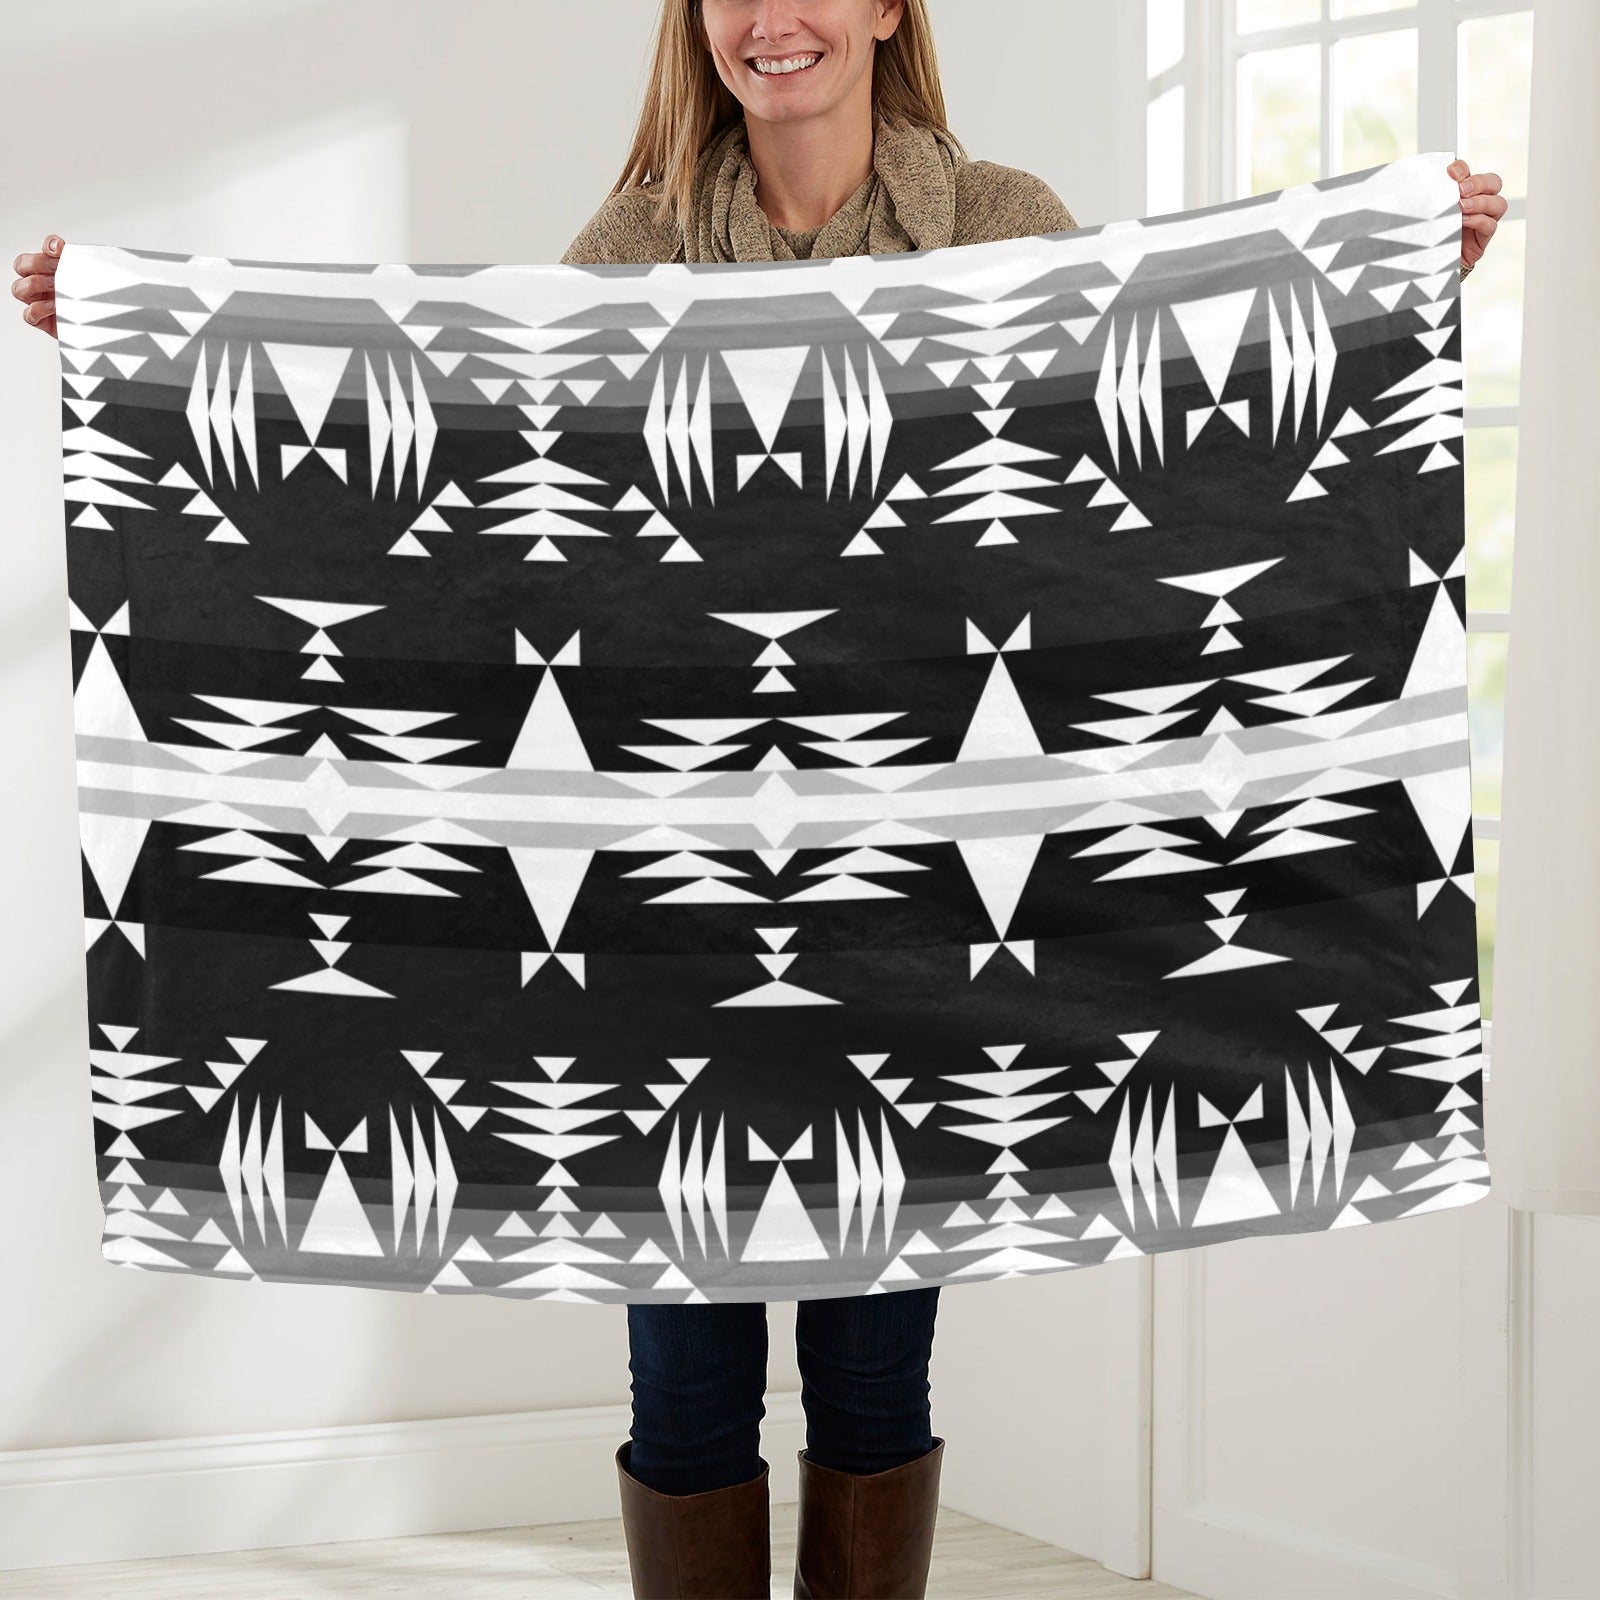 Between the Mountains Black and White Baby Blanket 40"x50" Baby Blanket 40"x50" e-joyer 